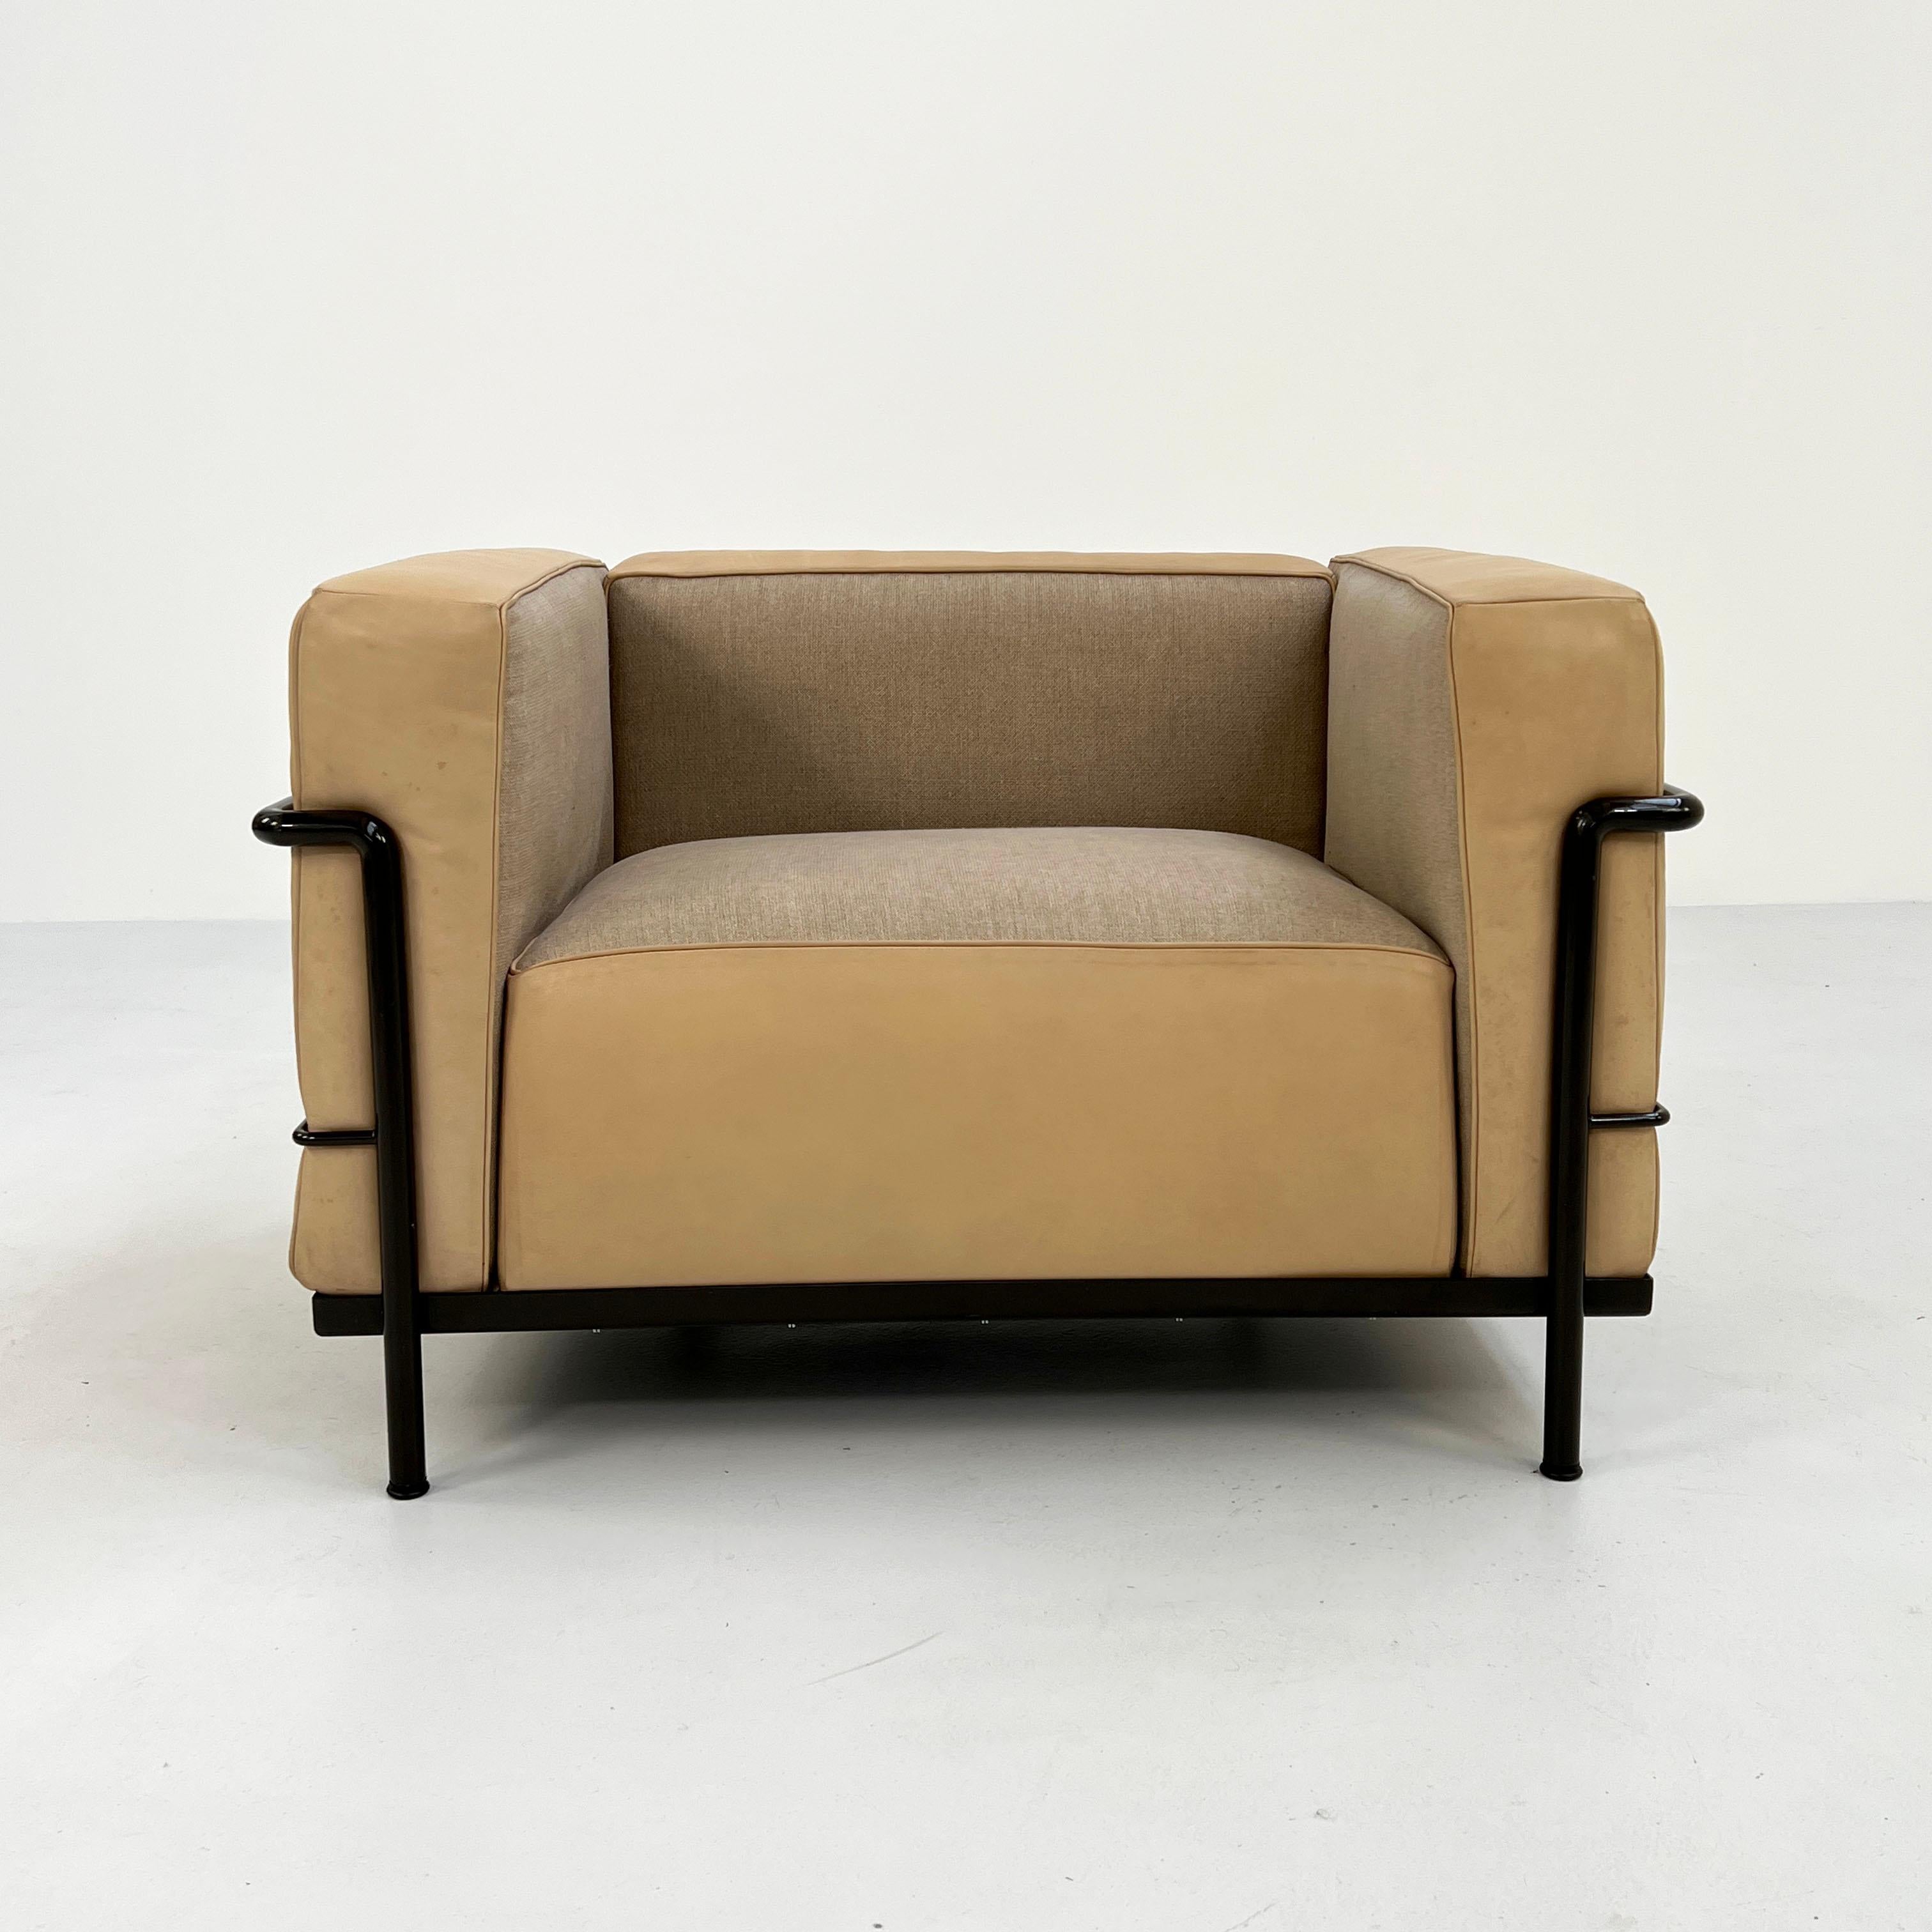 LC3 grand confort by Le Corbusier for Cassina, 2000s
Designer - Le Corbusier, Pierre Jeanneret and Charlotte Perriand
Producer - Cassina
Model - LC3 Grand Confort 
Design Period - 2000
Measurements - Width 99 cm x Depth 73 cm x Height 60 cm x